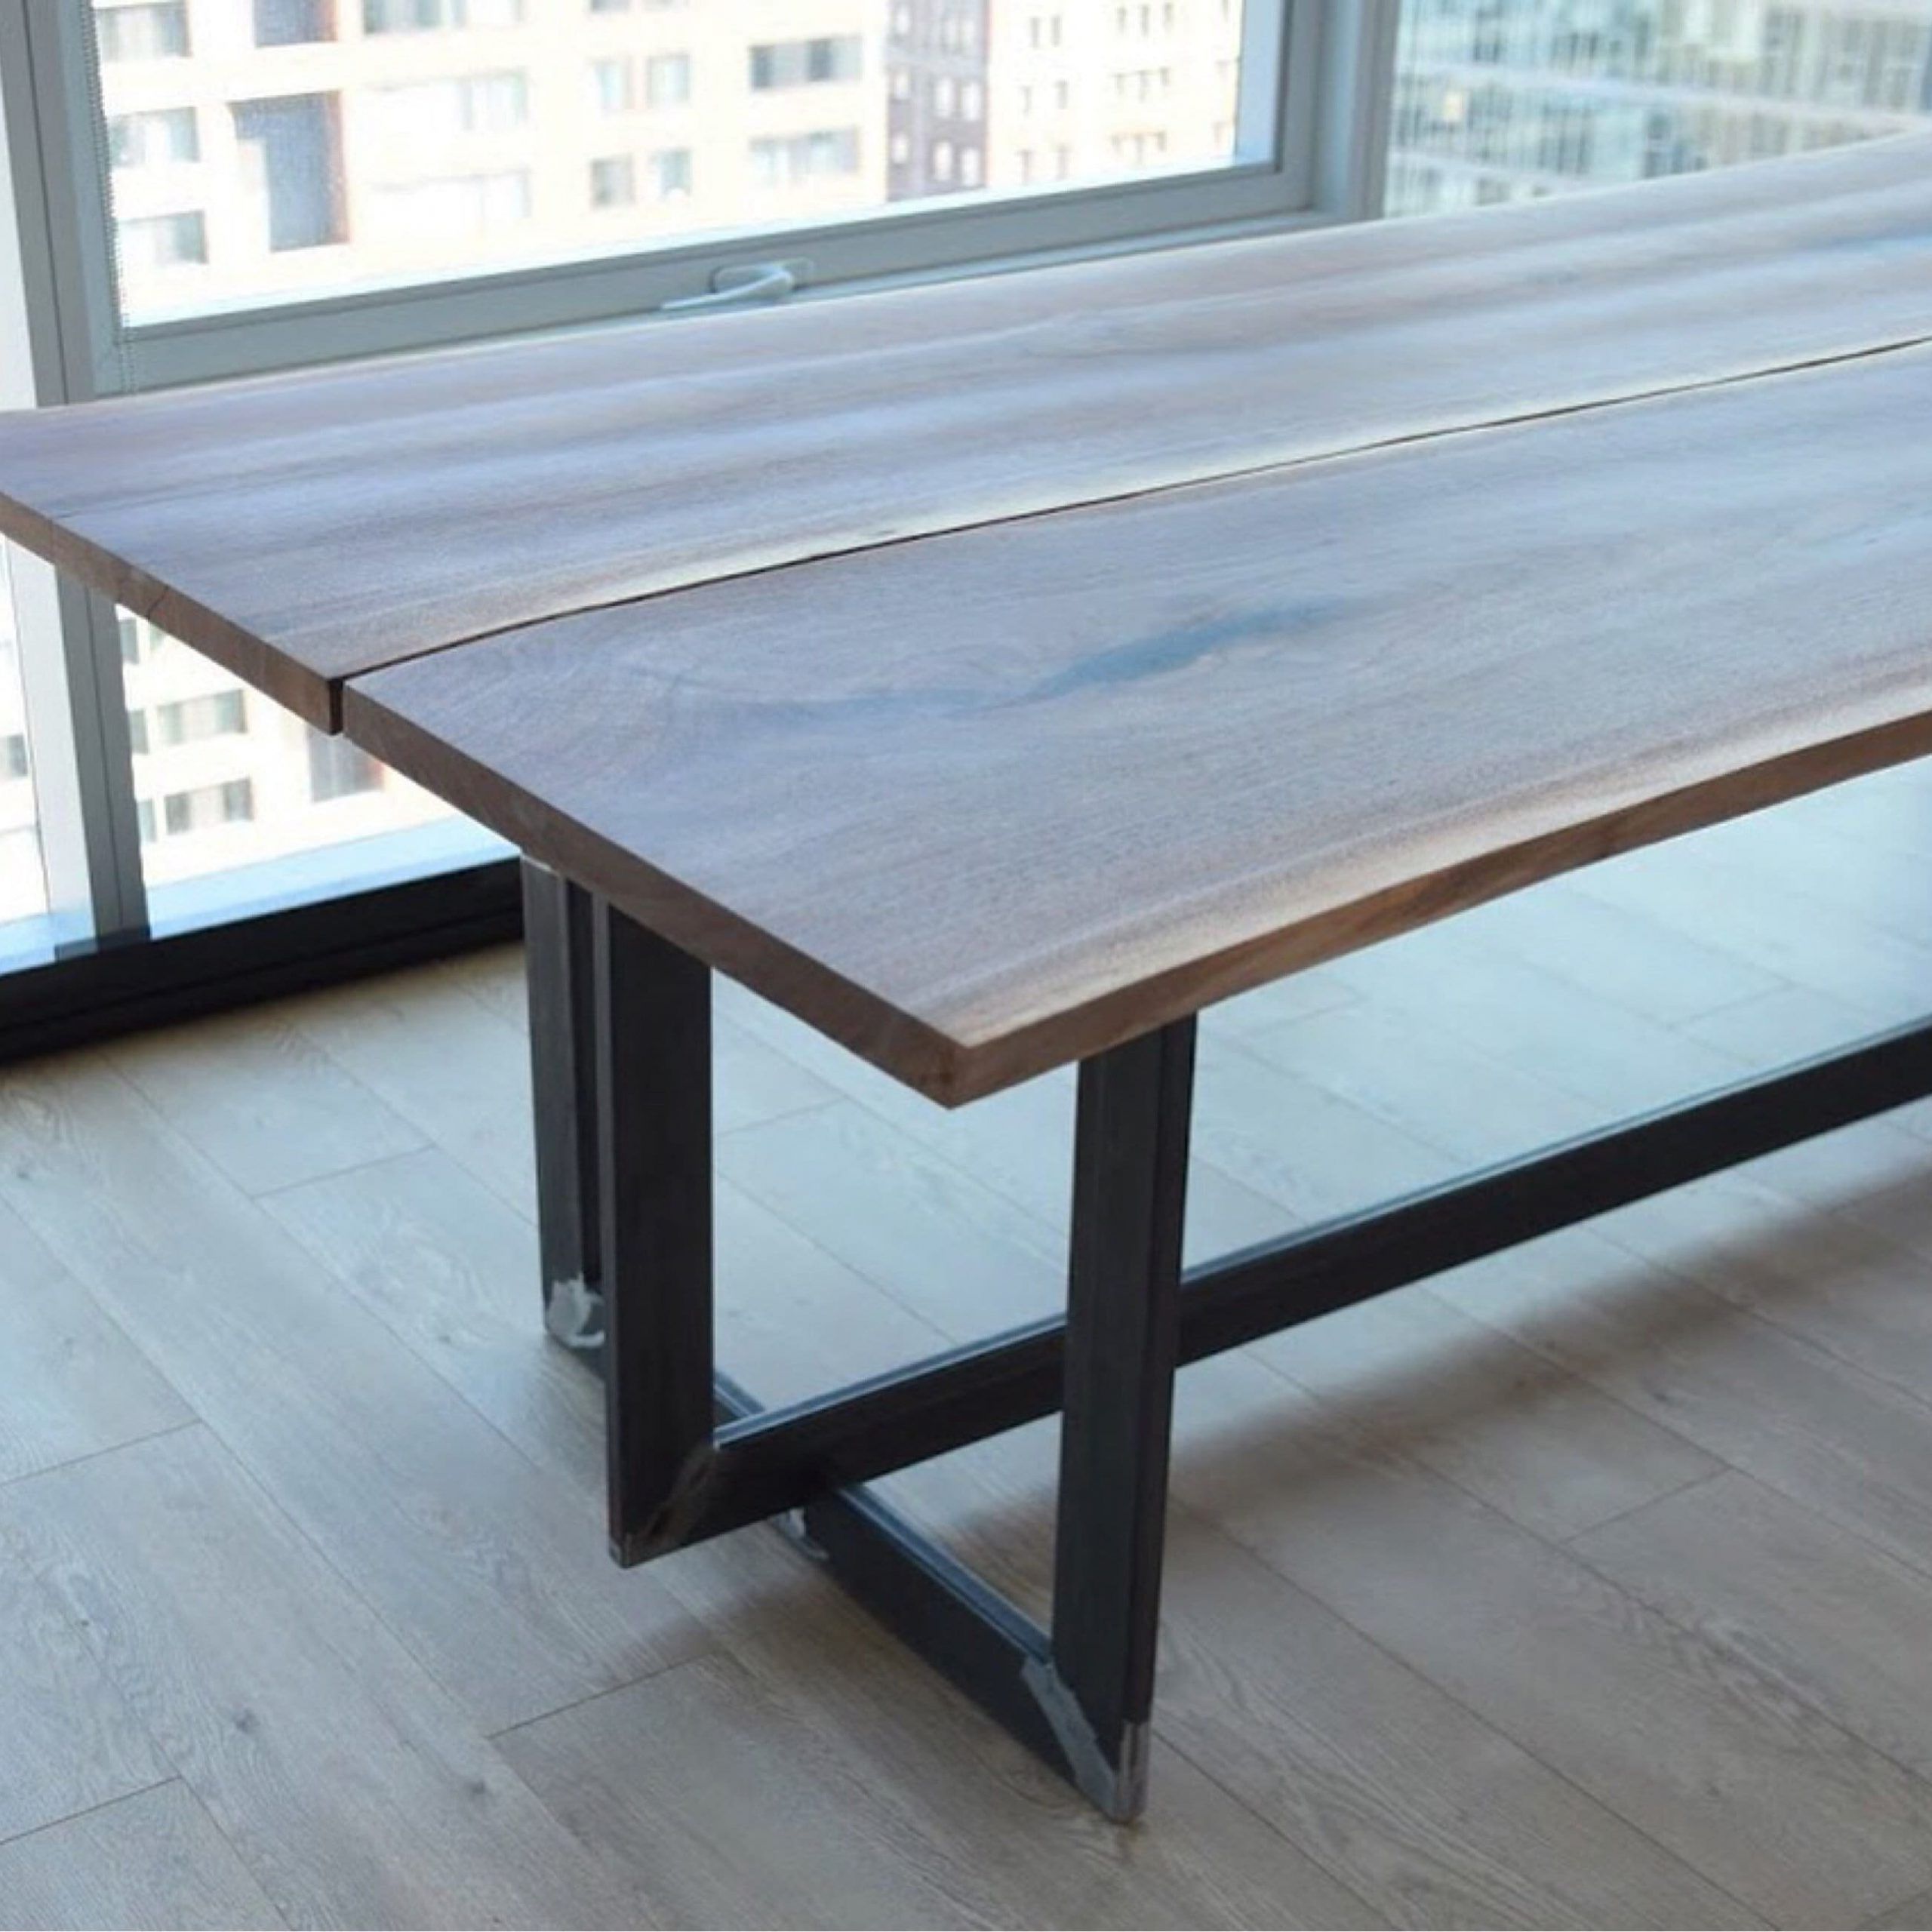 Black Walnut Live Edge Dining Table, Black Walnut Table Intended For Favorite Black And Walnut Dining Tables (View 15 of 15)